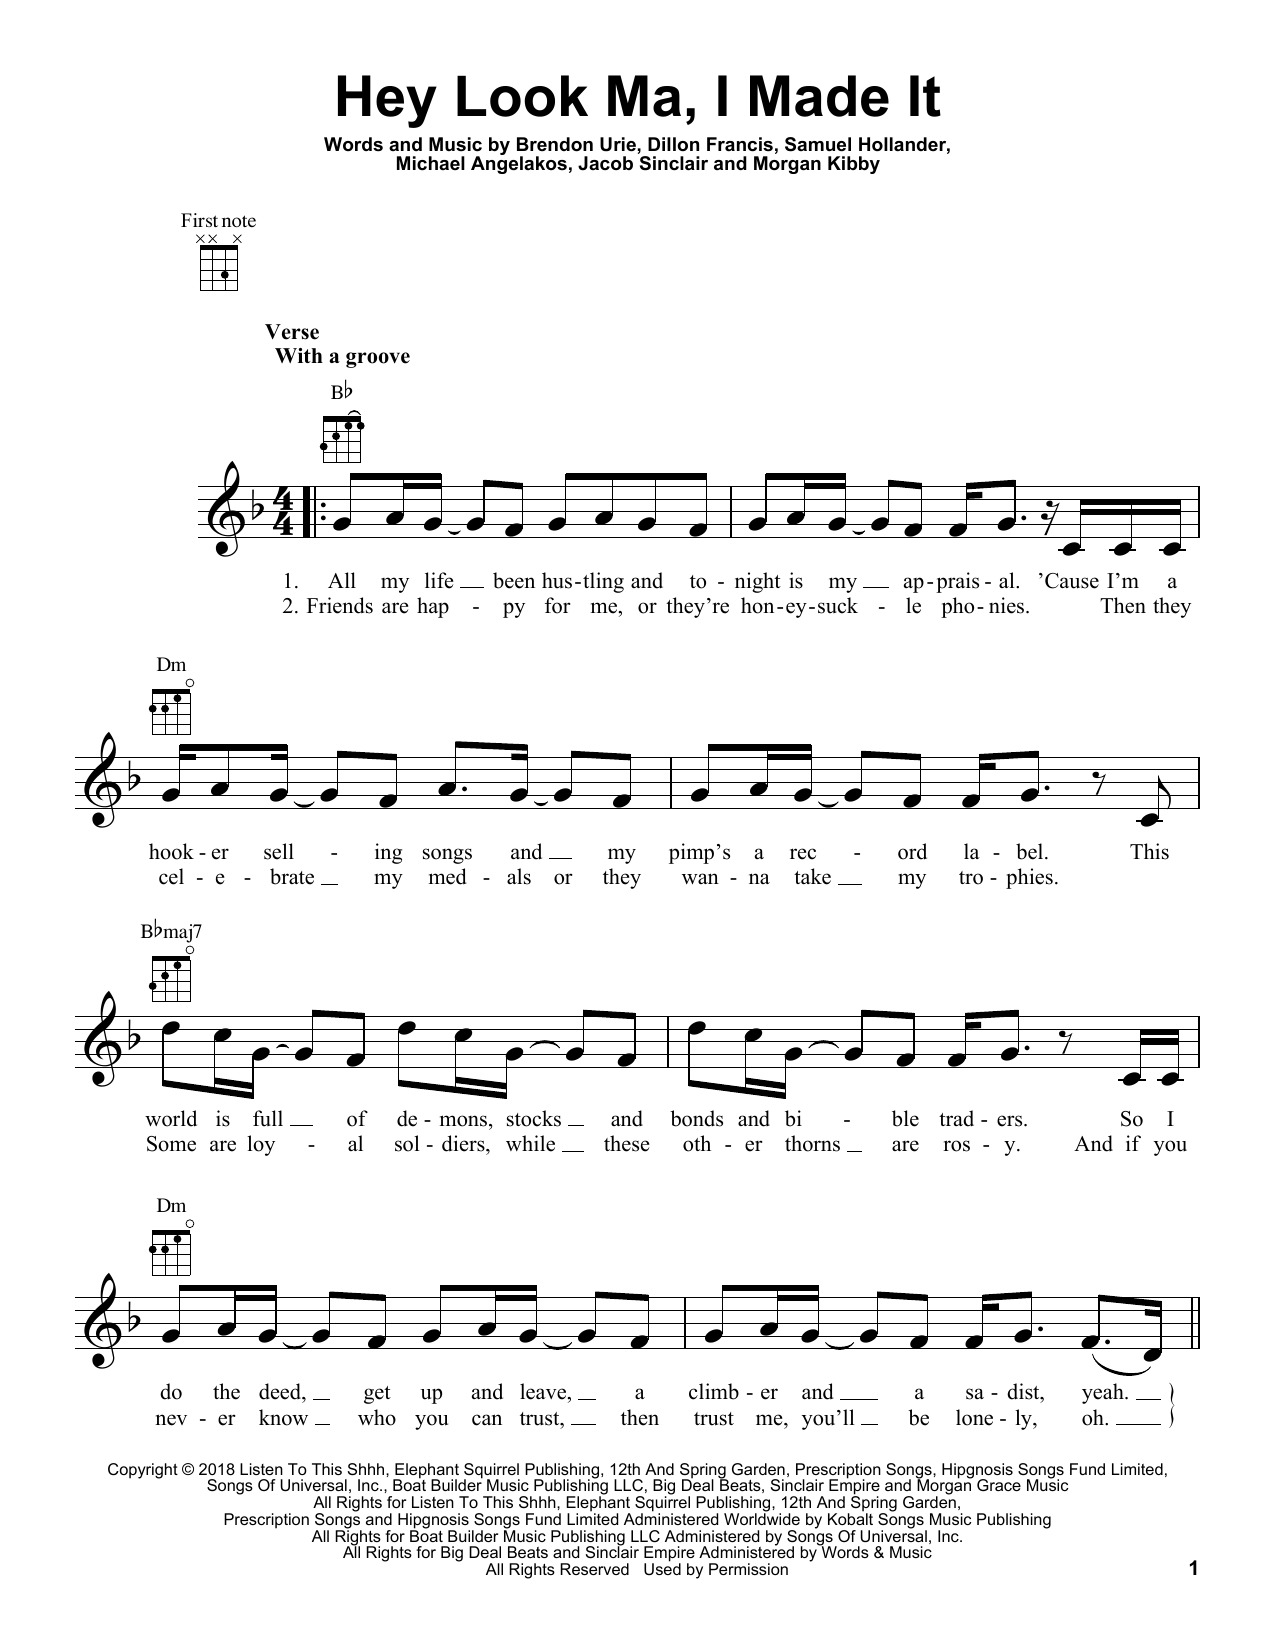 Download Panic! At The Disco Hey Look Ma, I Made It Sheet Music